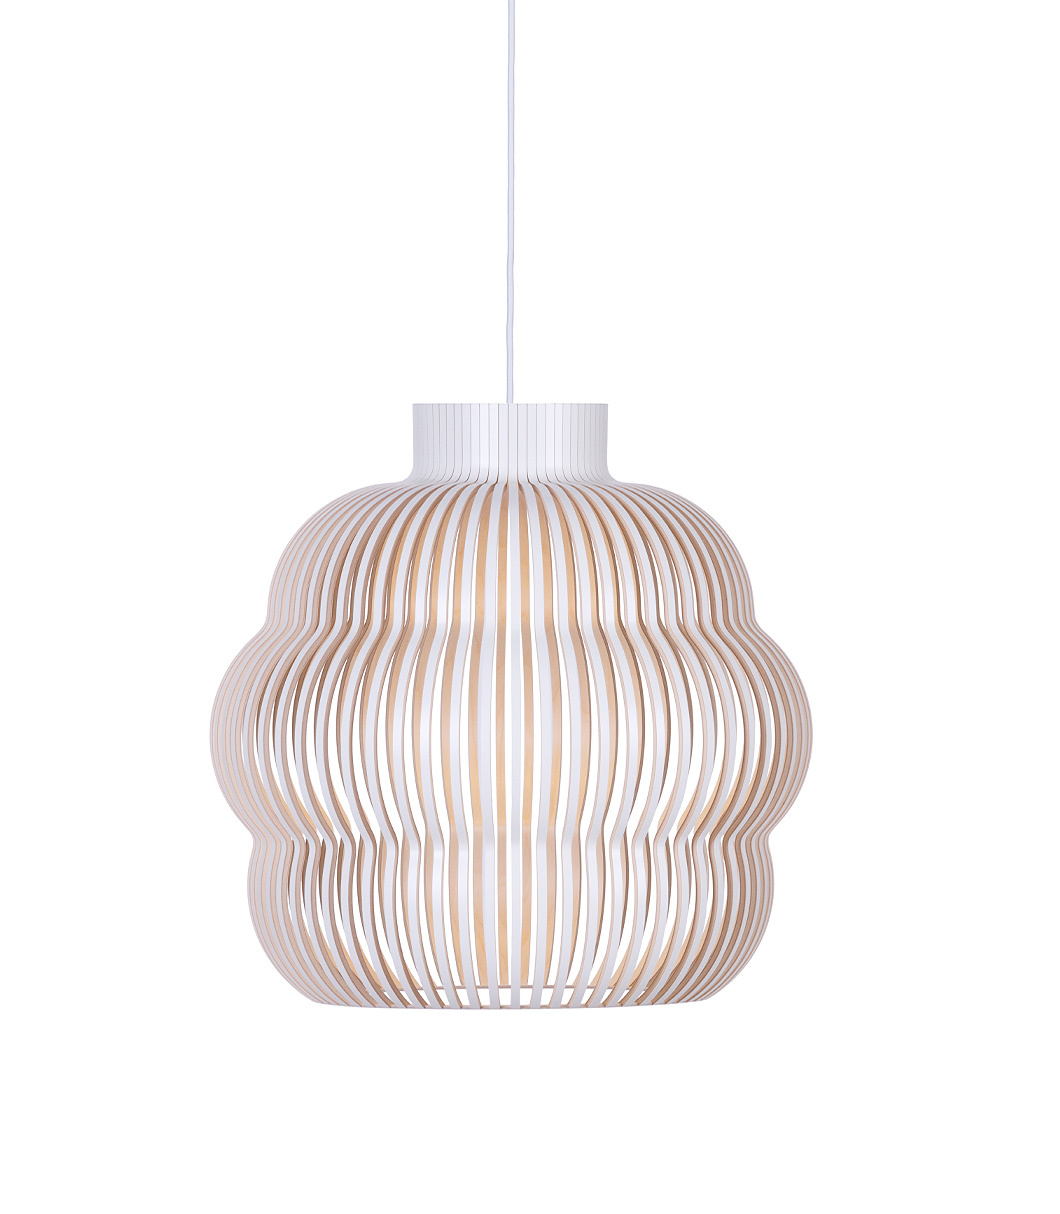 Kumulo 5200 pendant lamp is available in white laminated